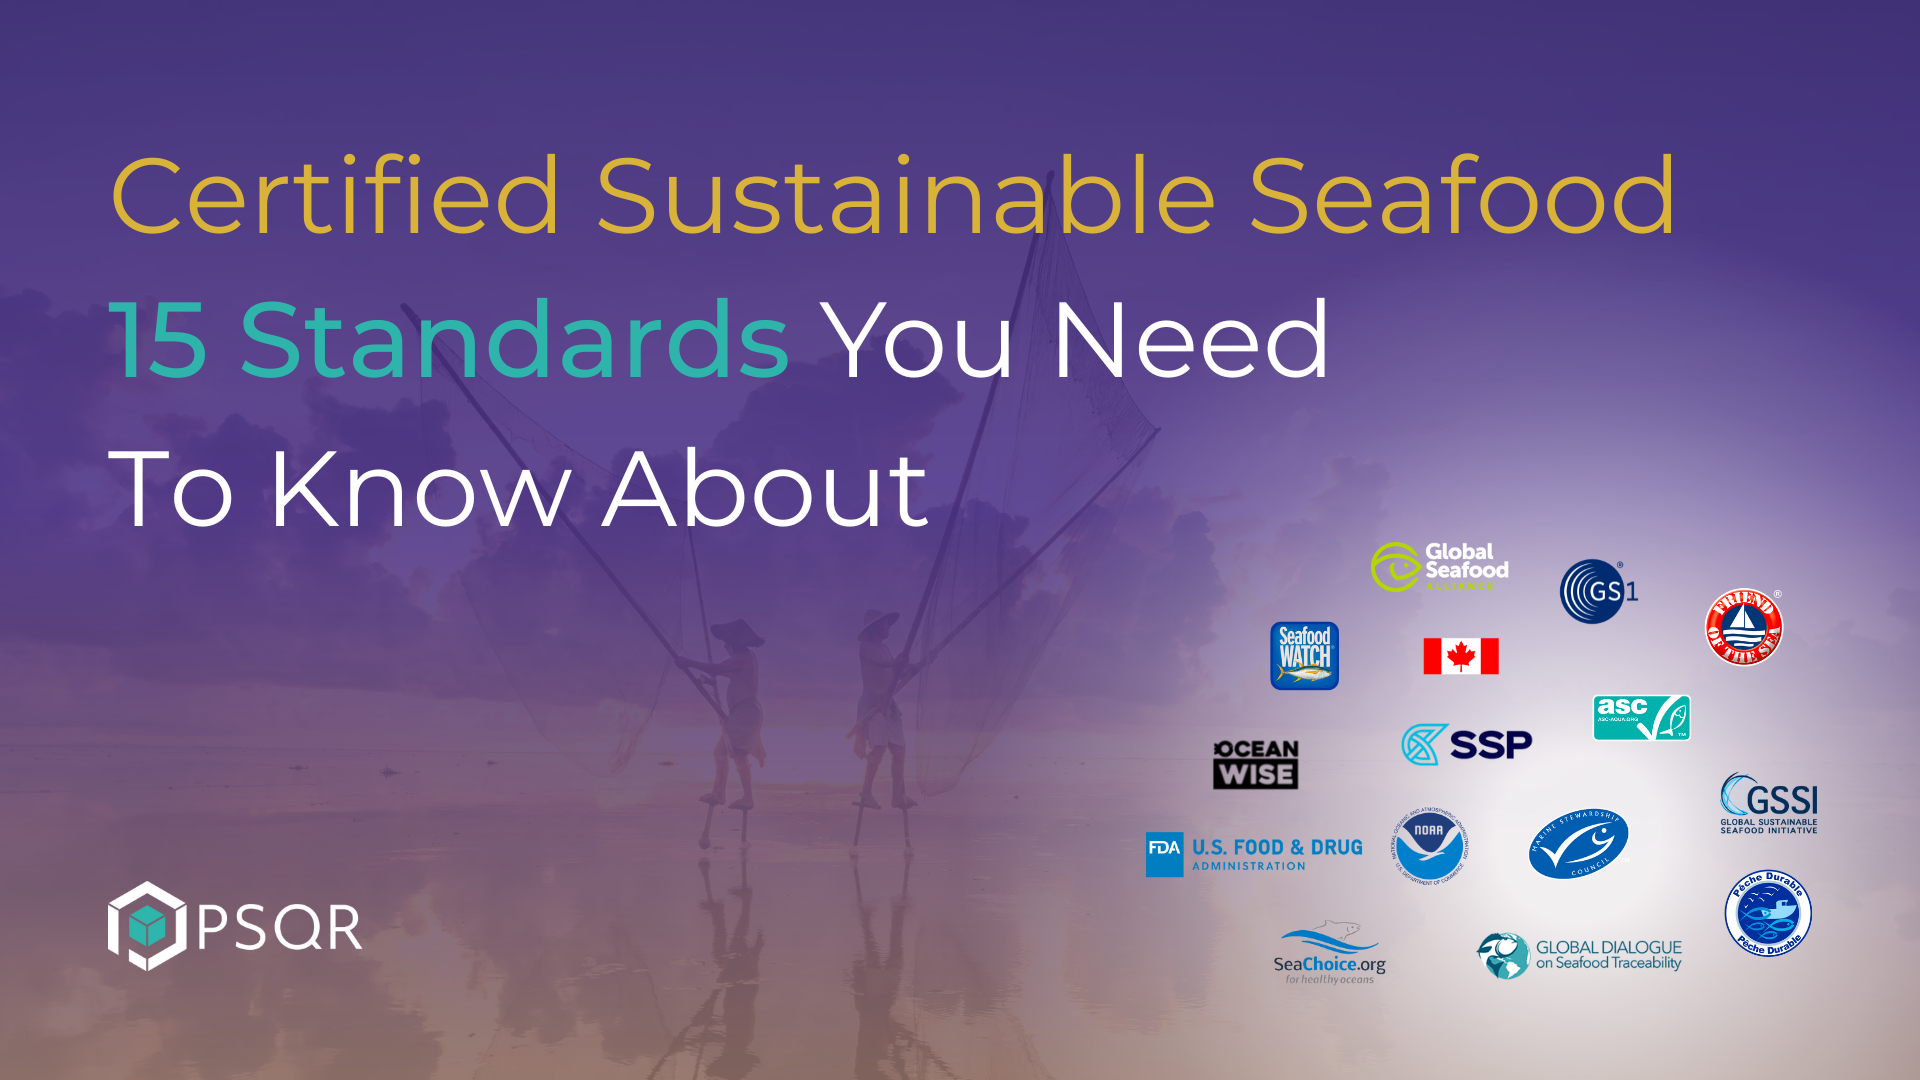 Certified Sustainable Seafood - 15 Standards You Should Know About